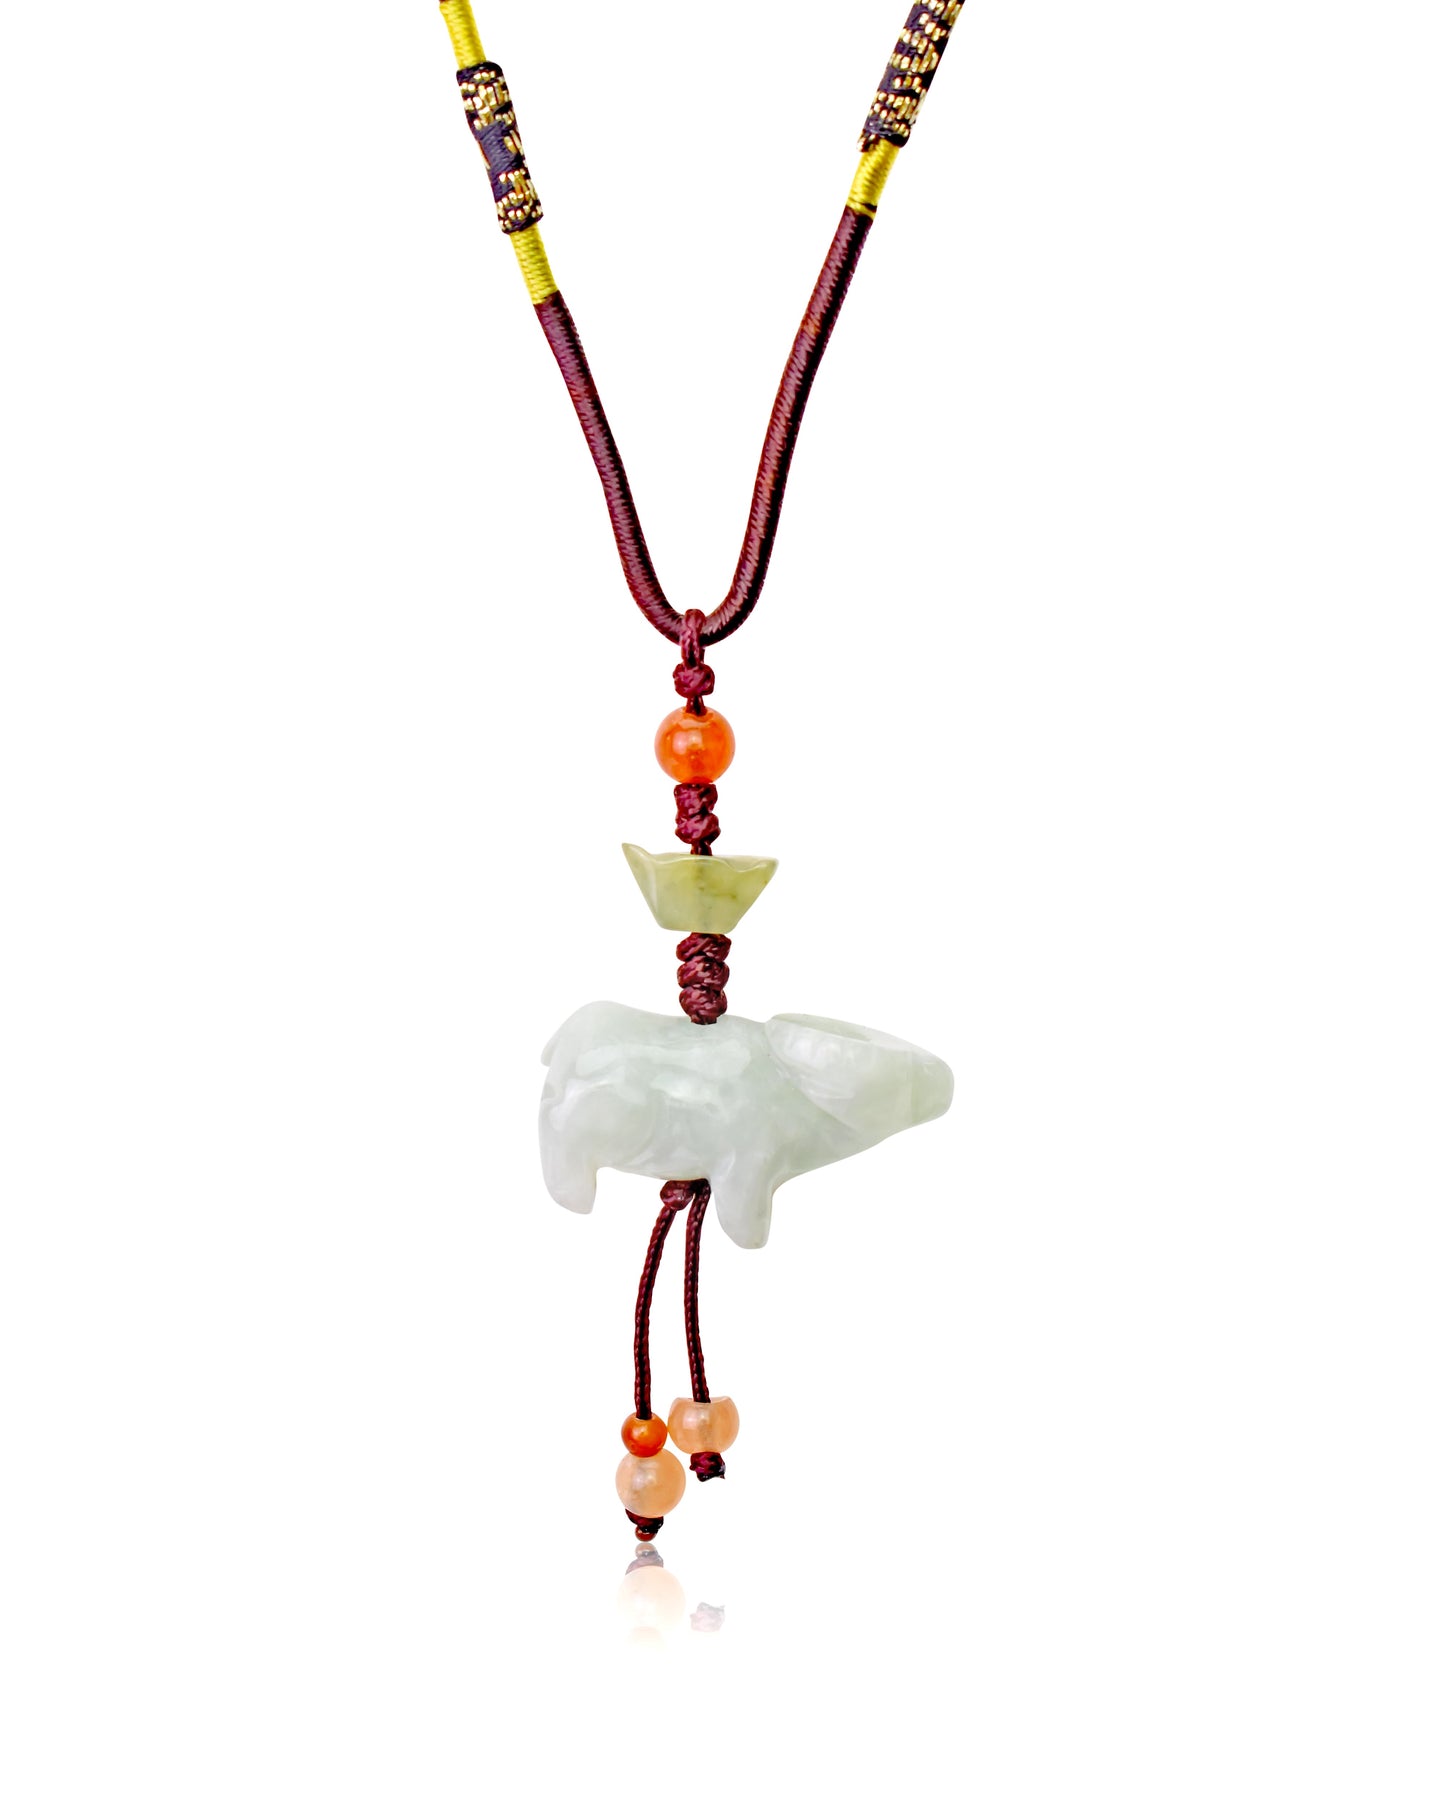 Wear Your Ox Zodiac Sign in Style with a Handmade Jade Necklace made with Brown Cord